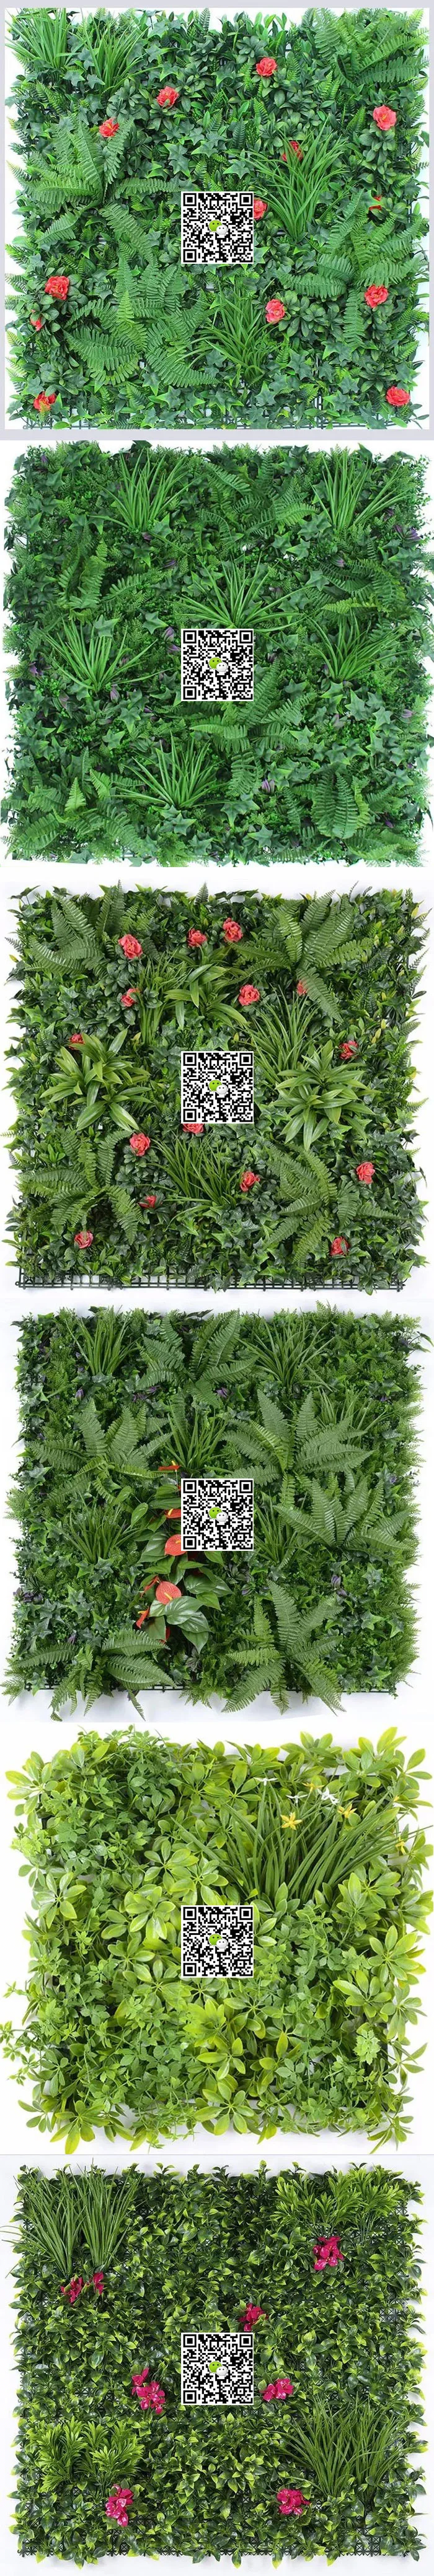 Wvt Artificial Plastic Boxwood Leaf Plant IVY Fence Green Wall Vertical Garden Hedge Covering